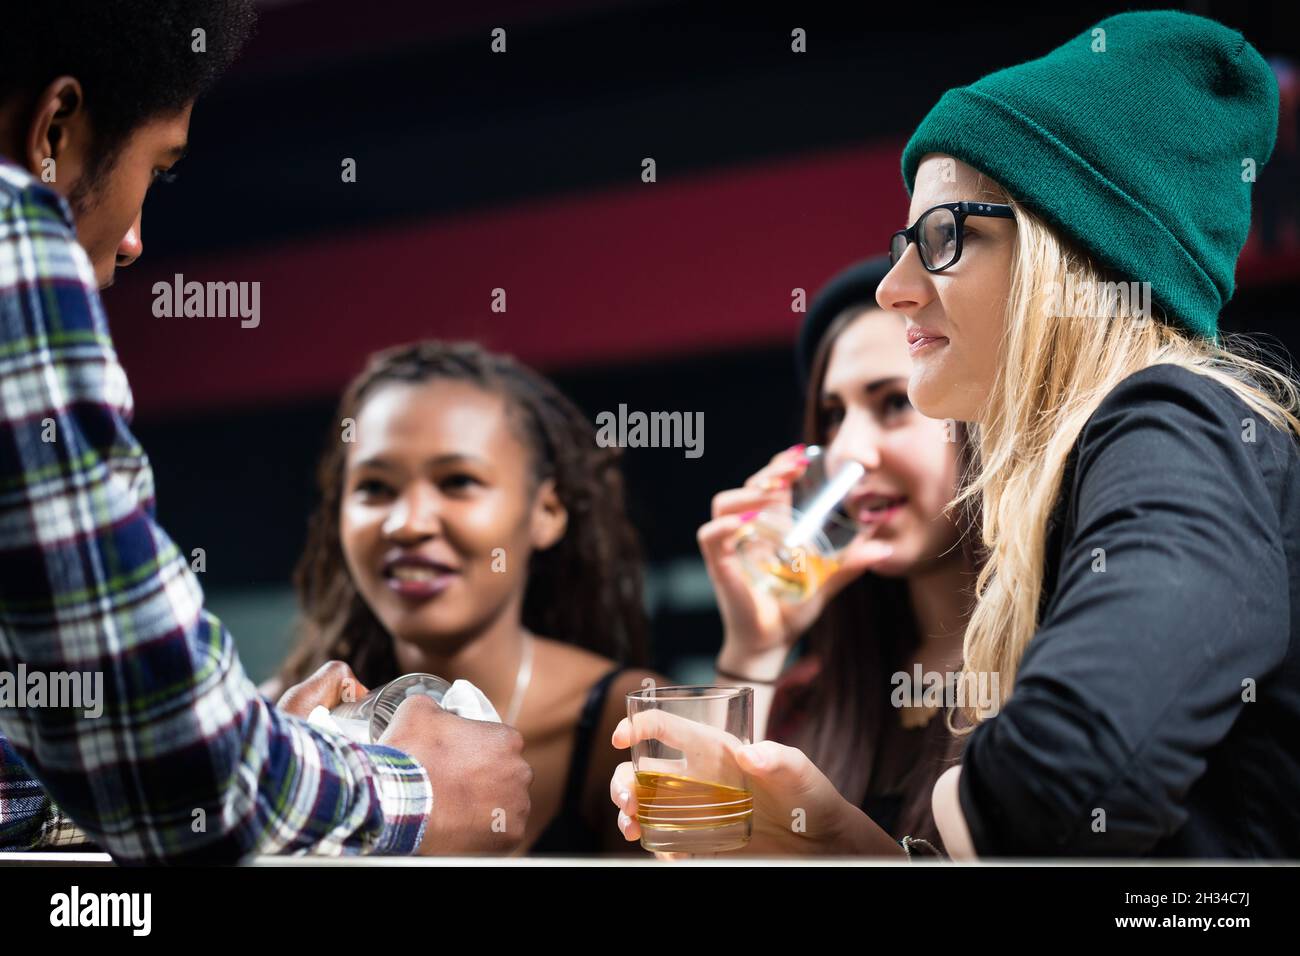 Diverse friends hanging out together Stock Photo